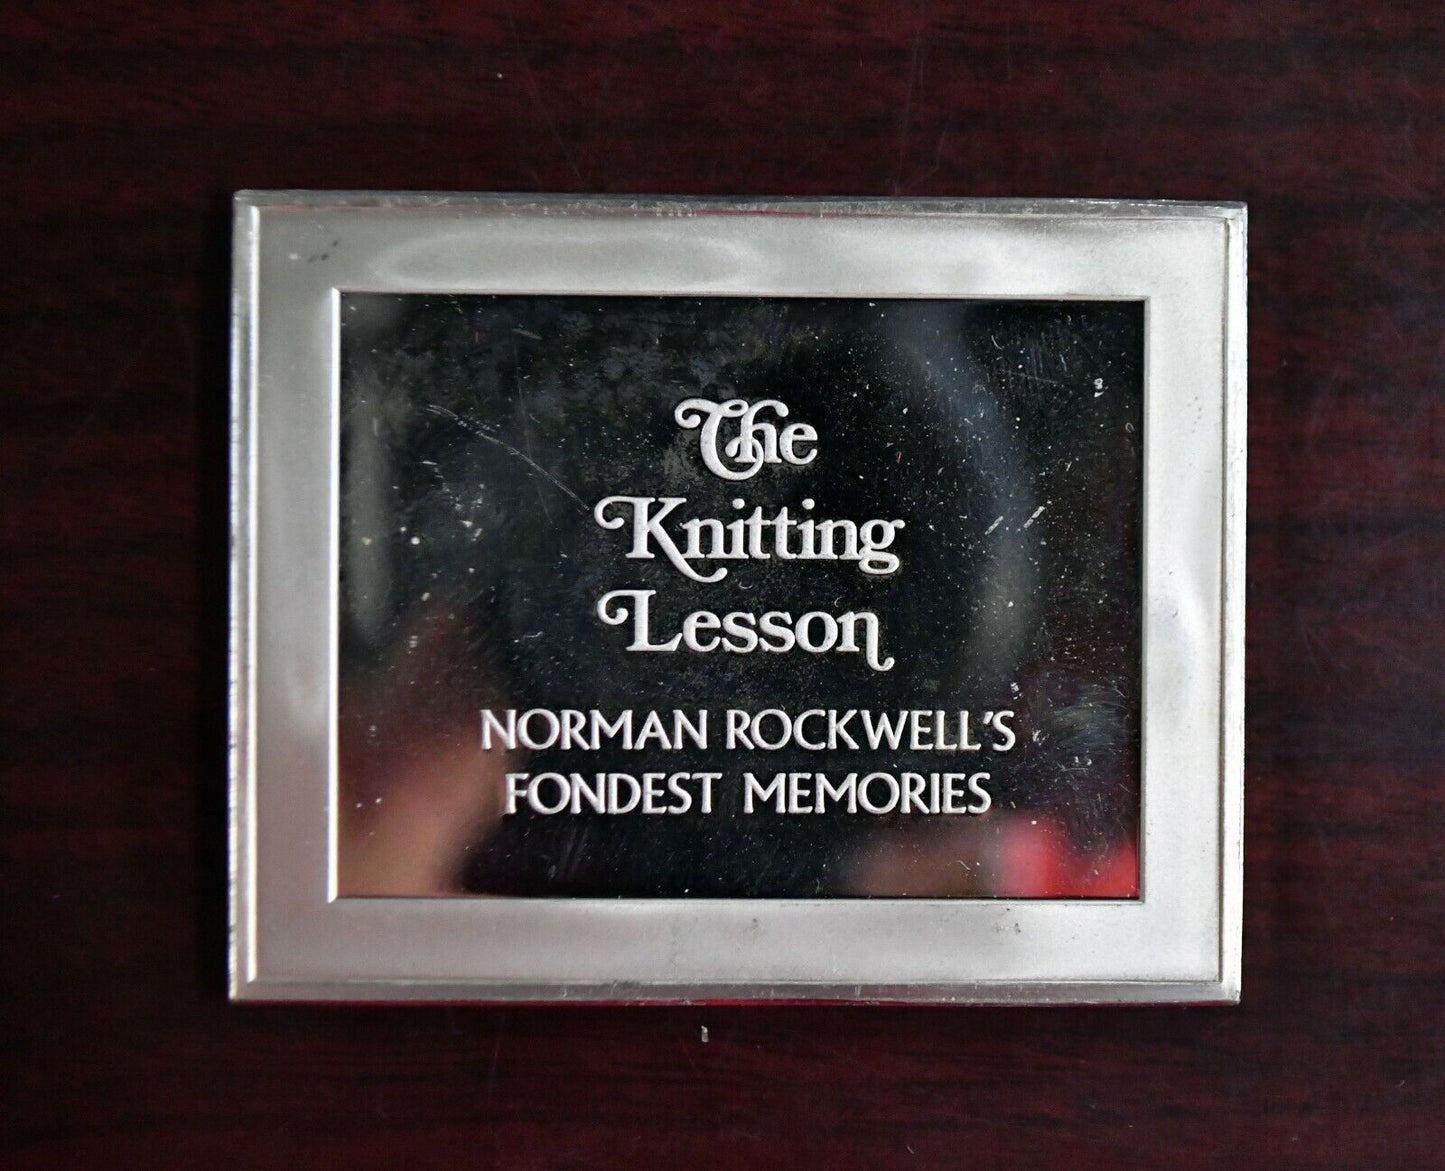 1979 Norman Rockwell "The Knitting Lesson" Sterling Silver 3.2 oz. Franklin Mint